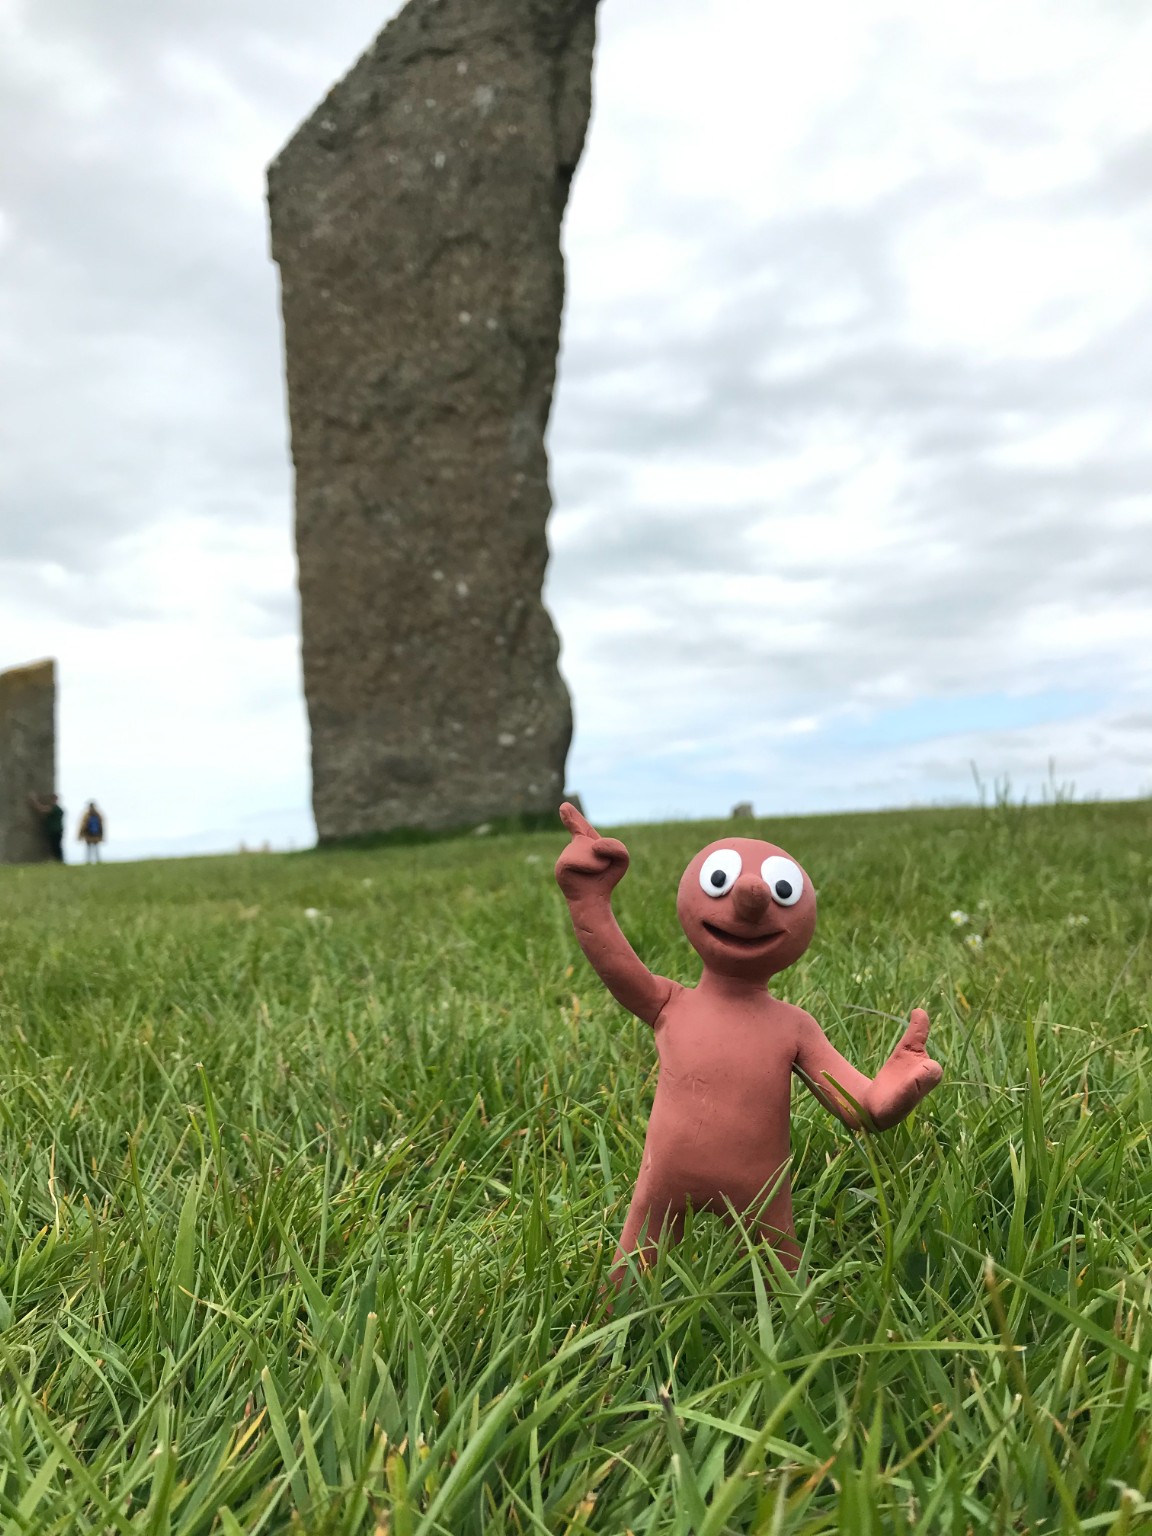 Morph at the Standing Stones of Stenness, Orkney